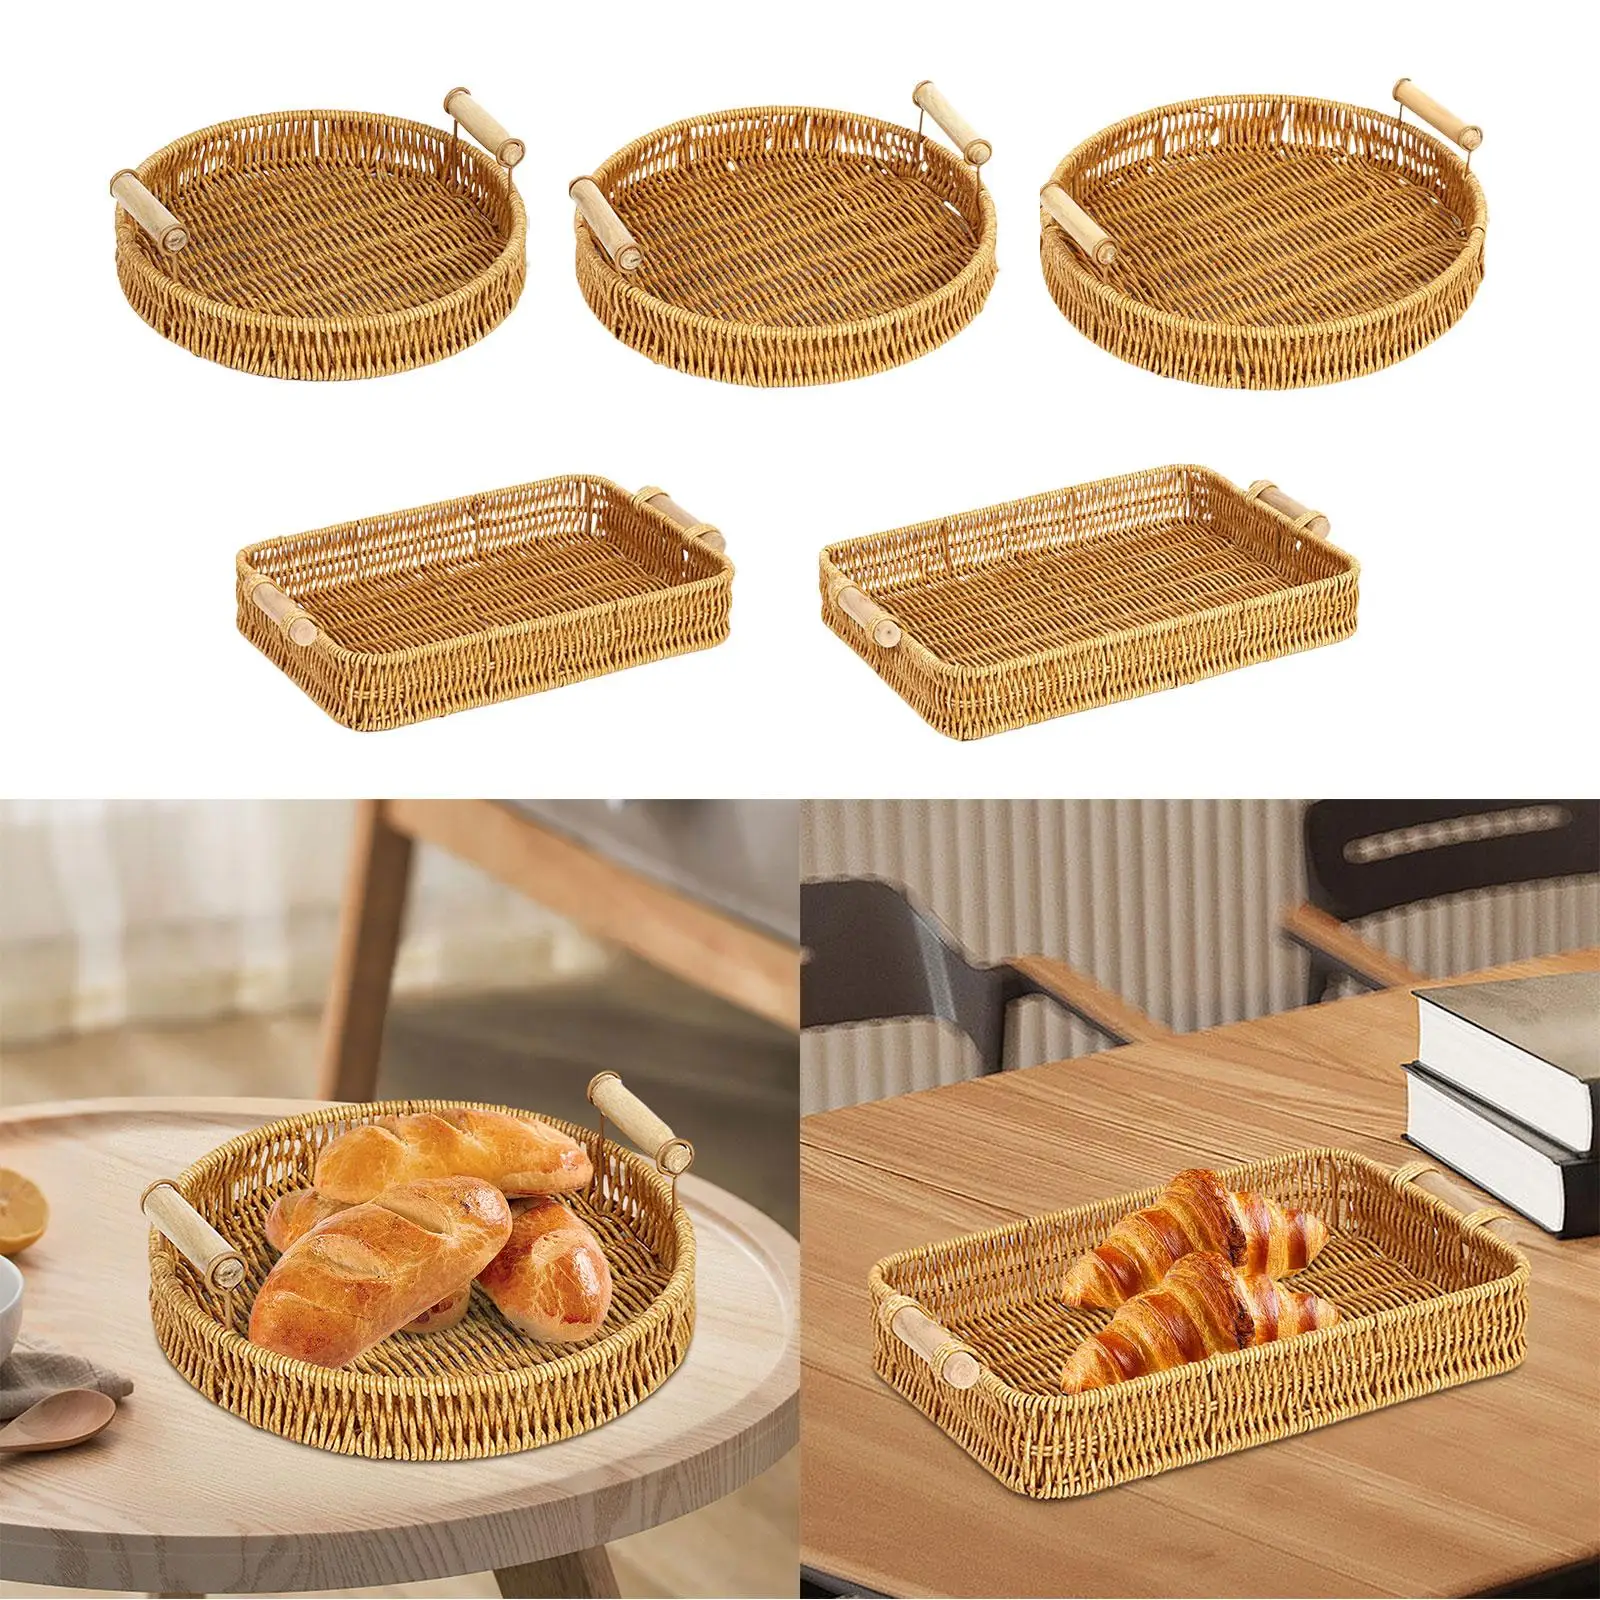 Fruit Baskets with Handle Decorative Bowl Food Storage Bowls Food Organizer Tray for Camping Desktop Outdoor Living Room Picnic